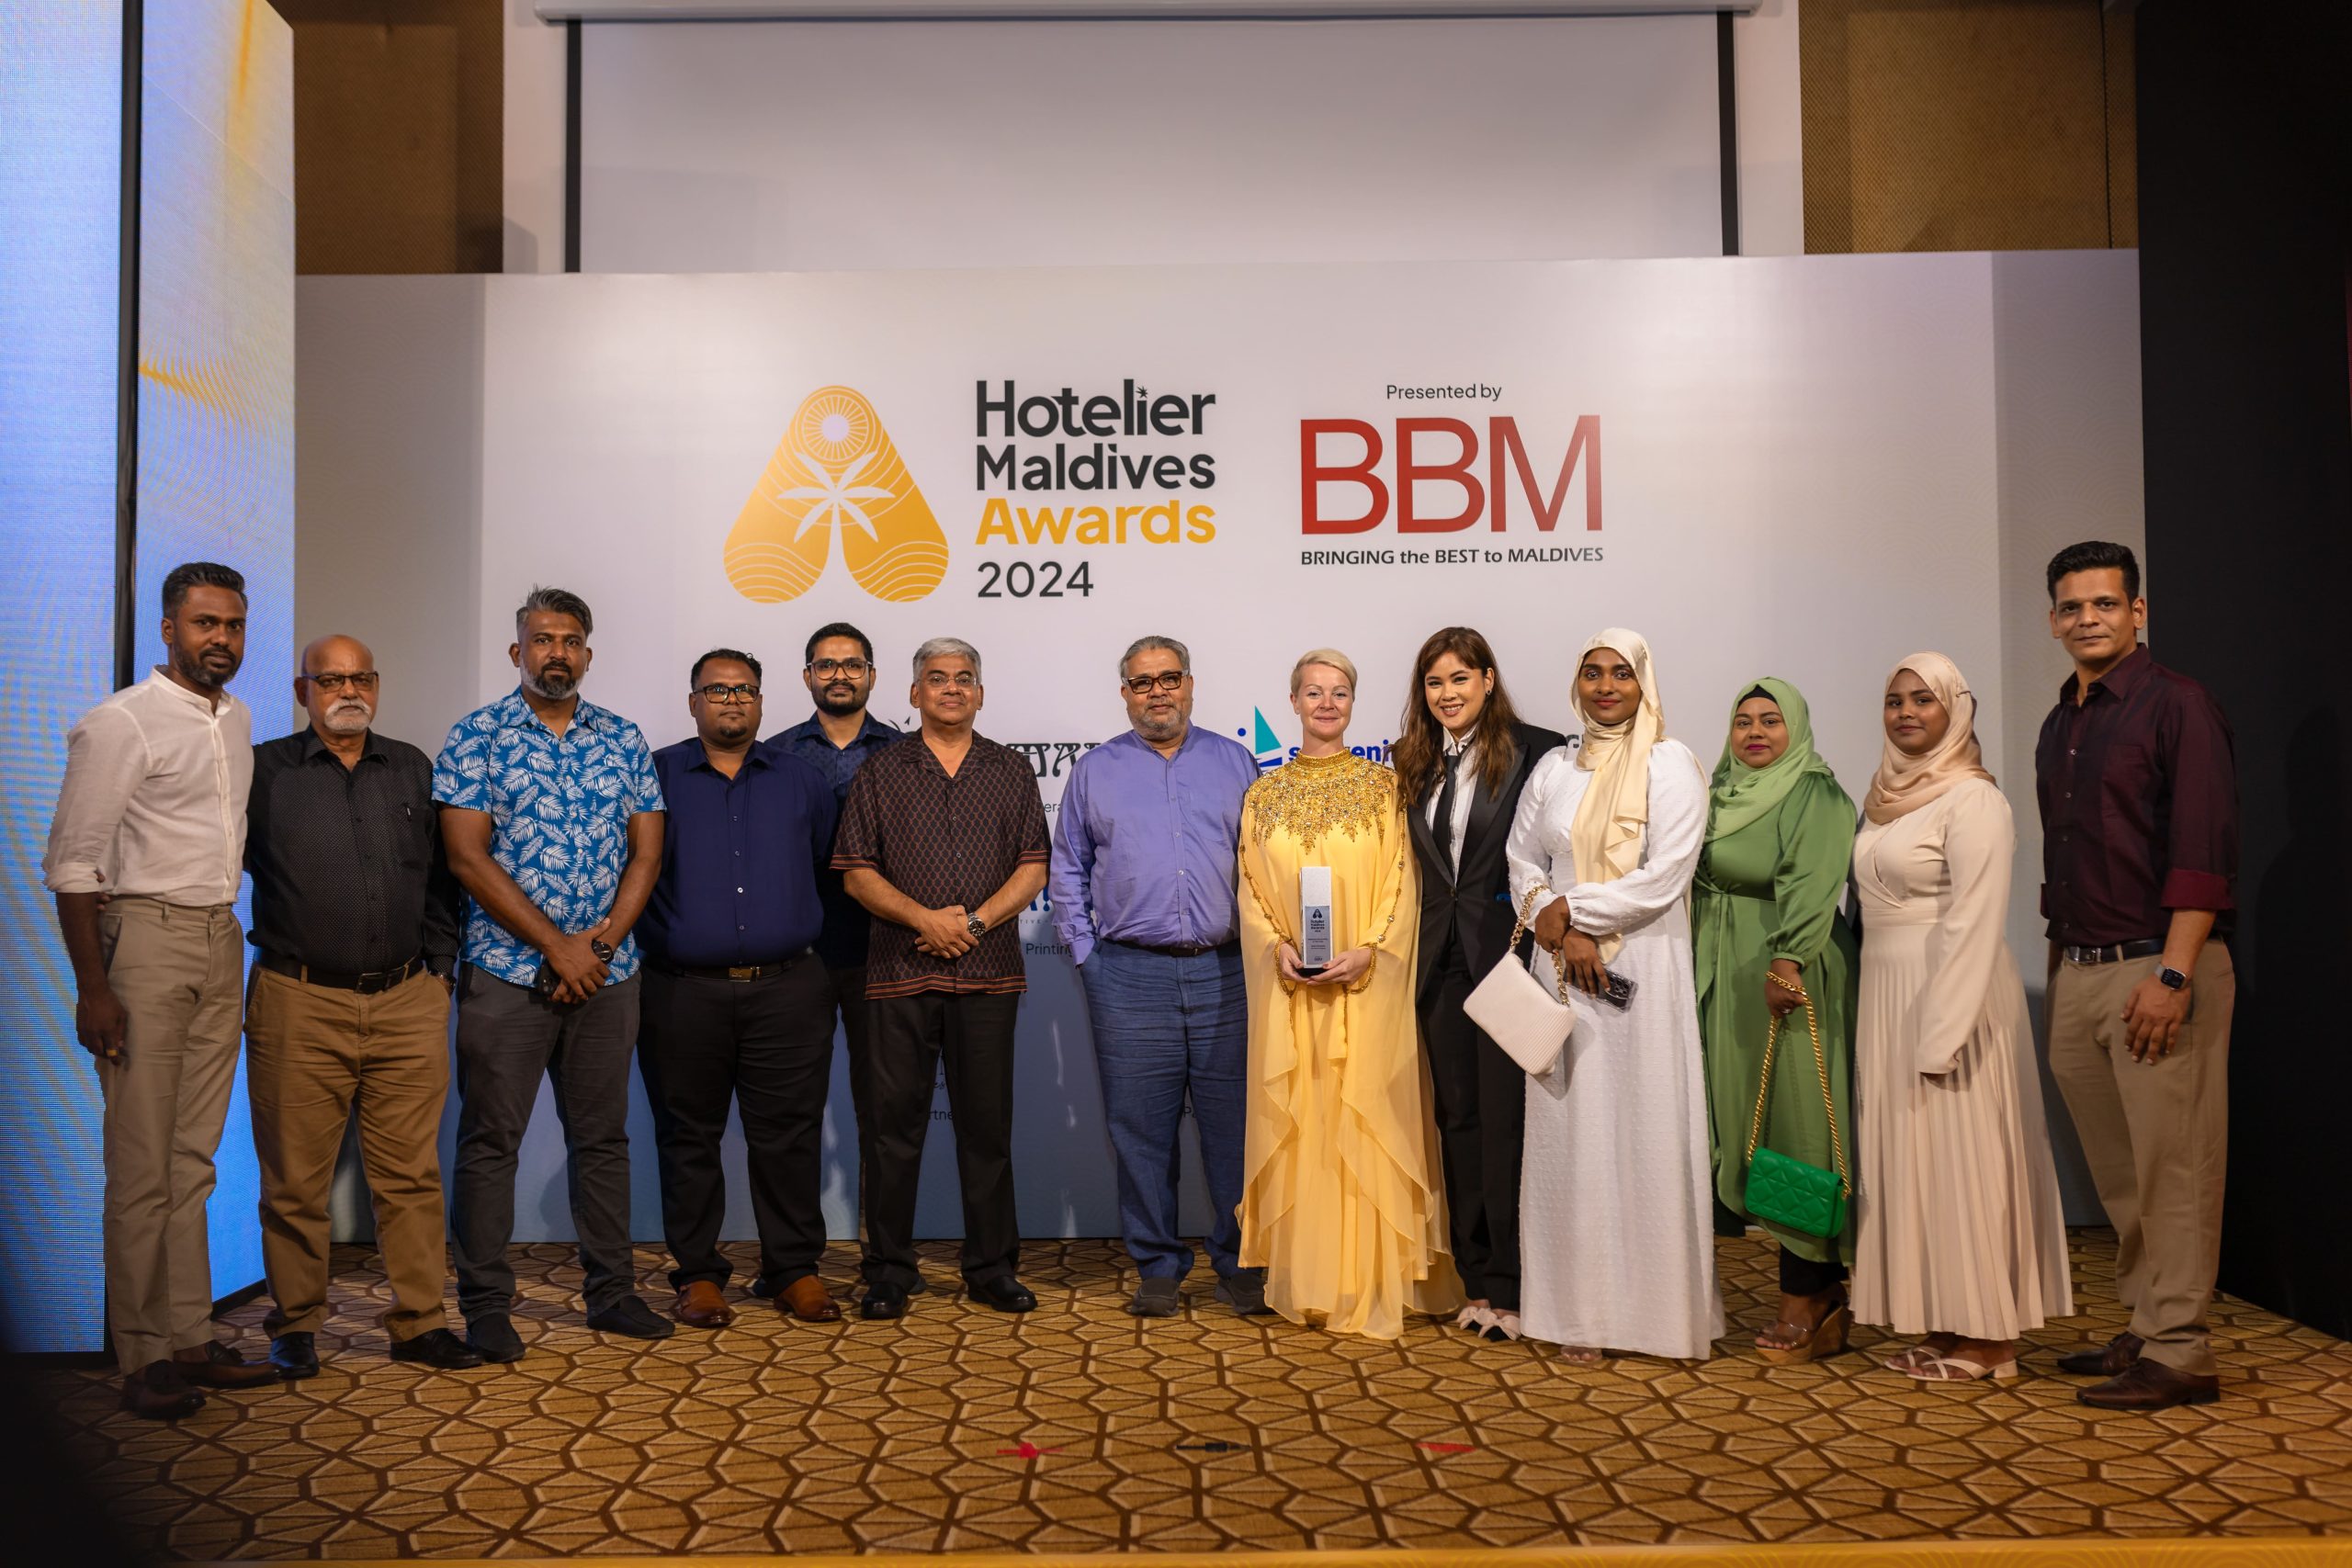 Heidi Grimwood Awarded Wellness Personality of the Year at Hotelier Maldives Awards 2024